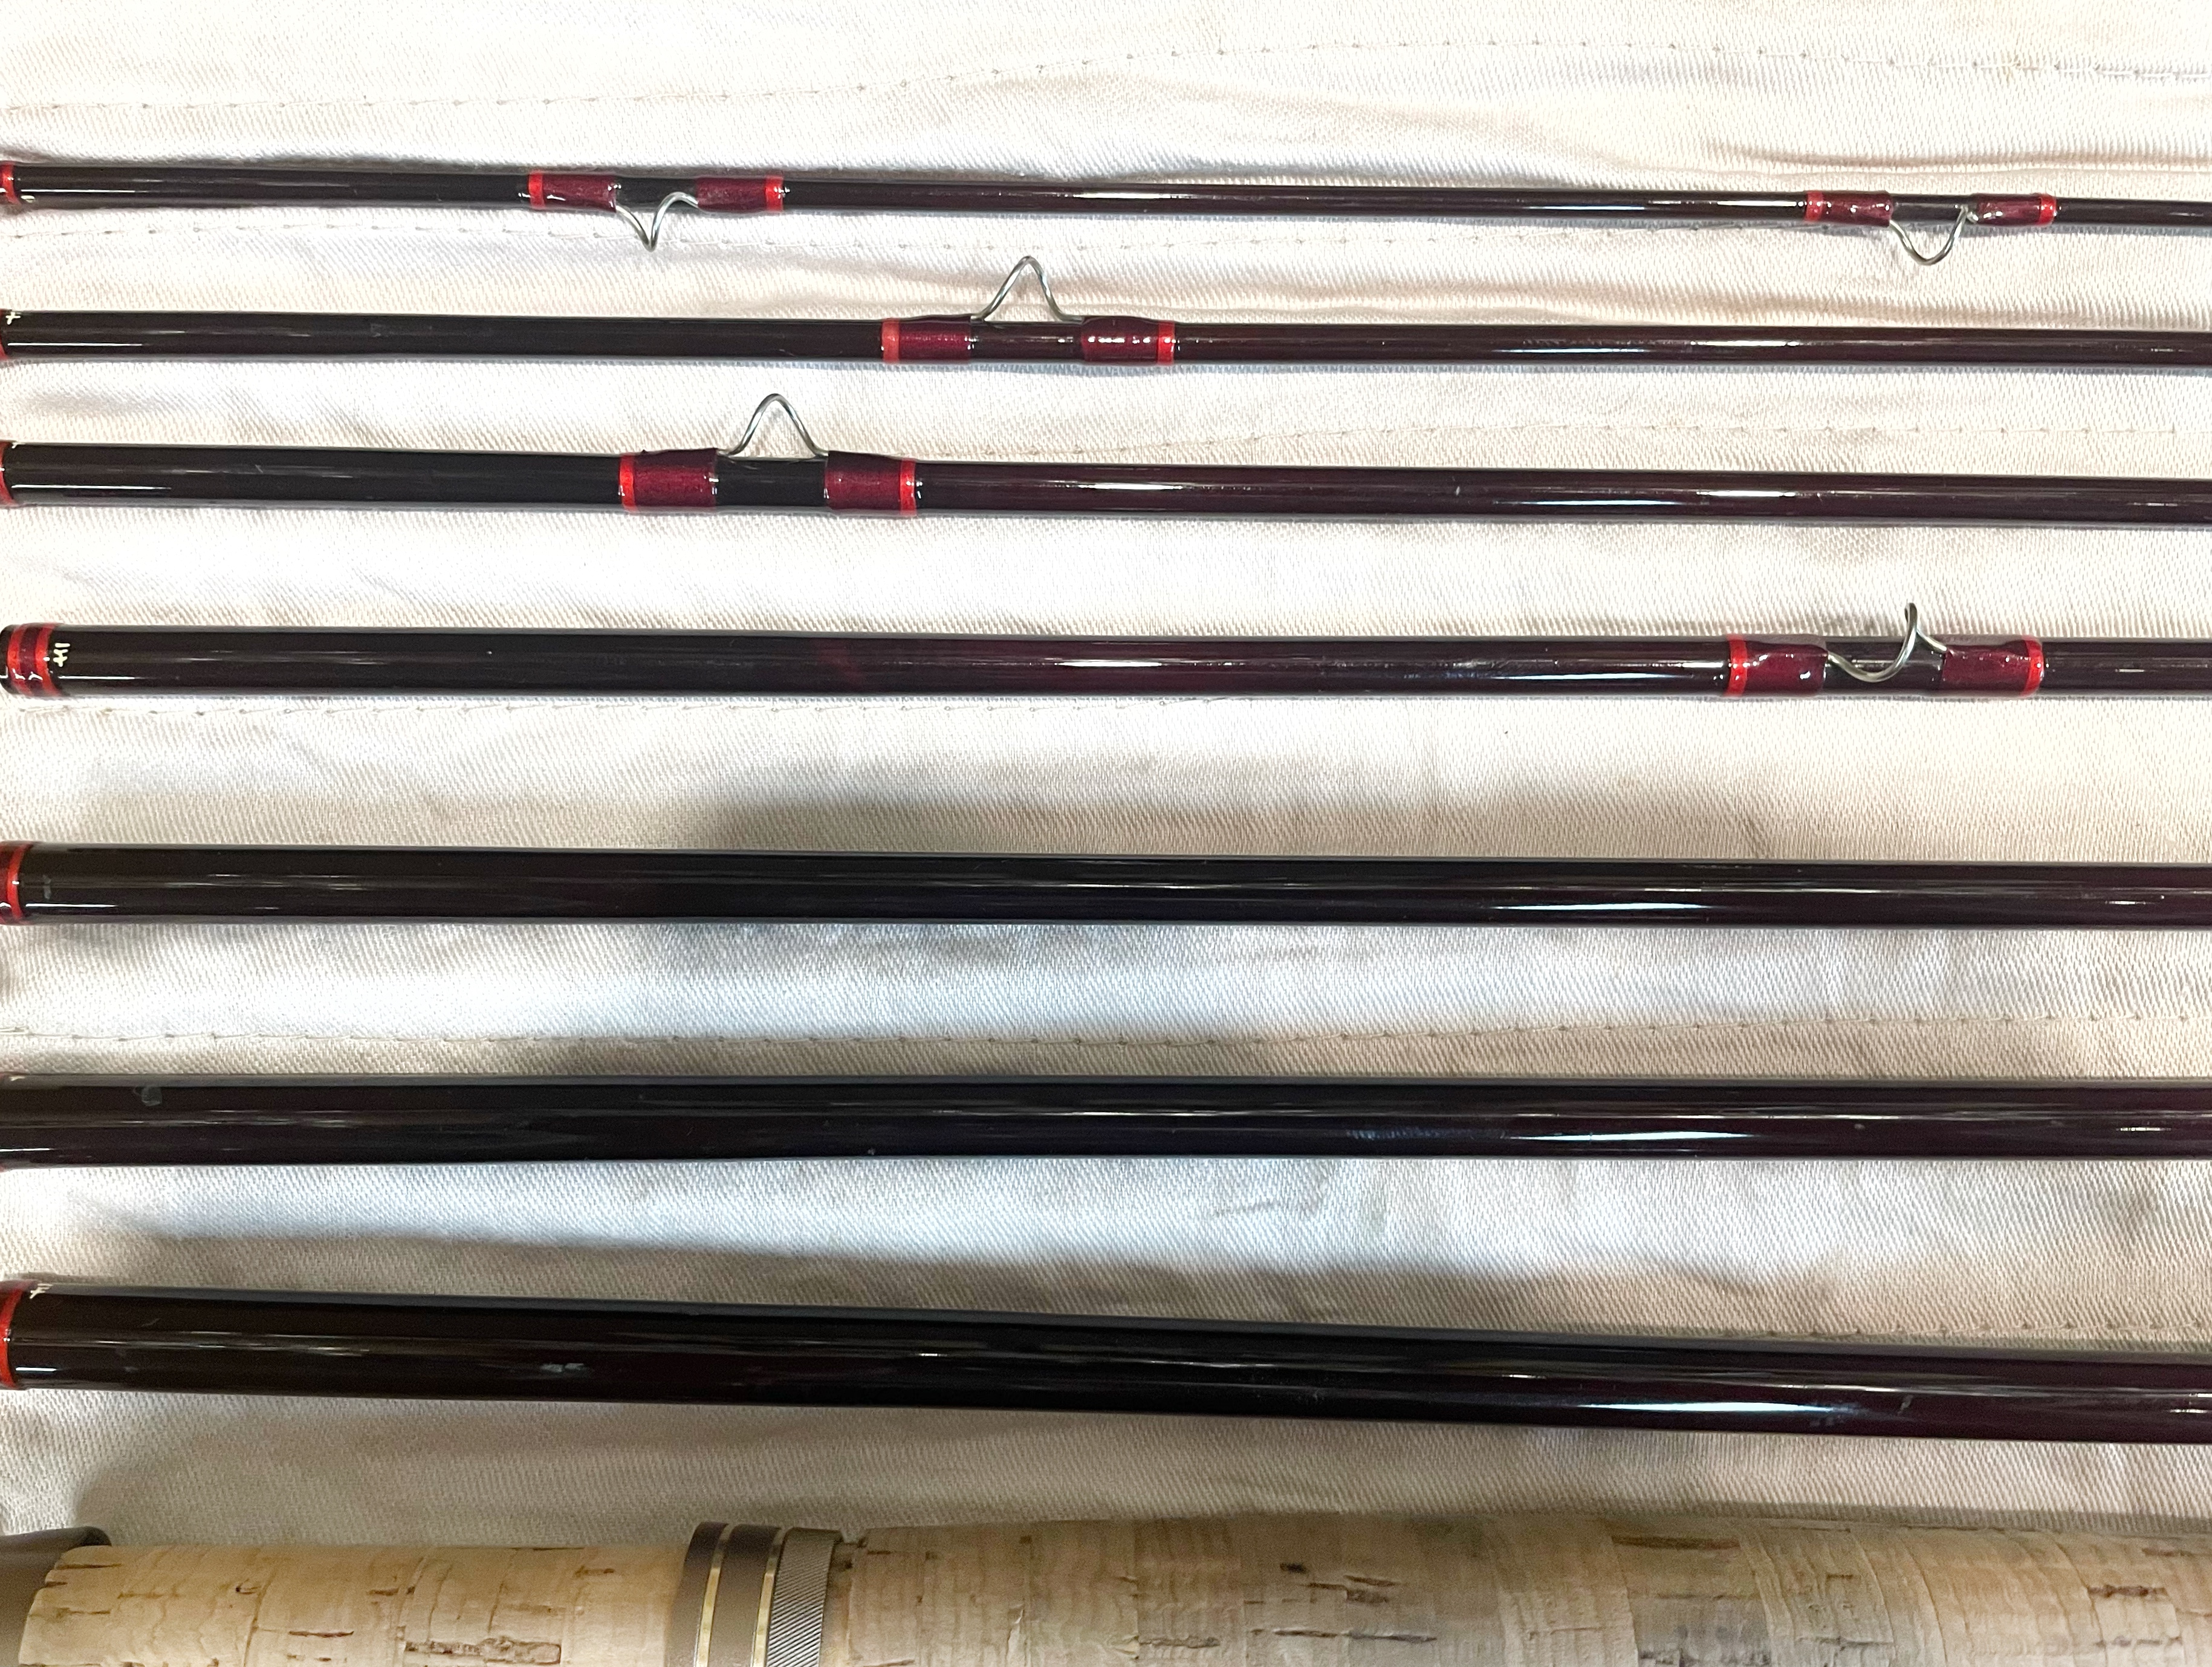 Used Hardy Smuggler 9'5 - 7wt 8 piece Fly Rod - Western Rivers Flyfisher